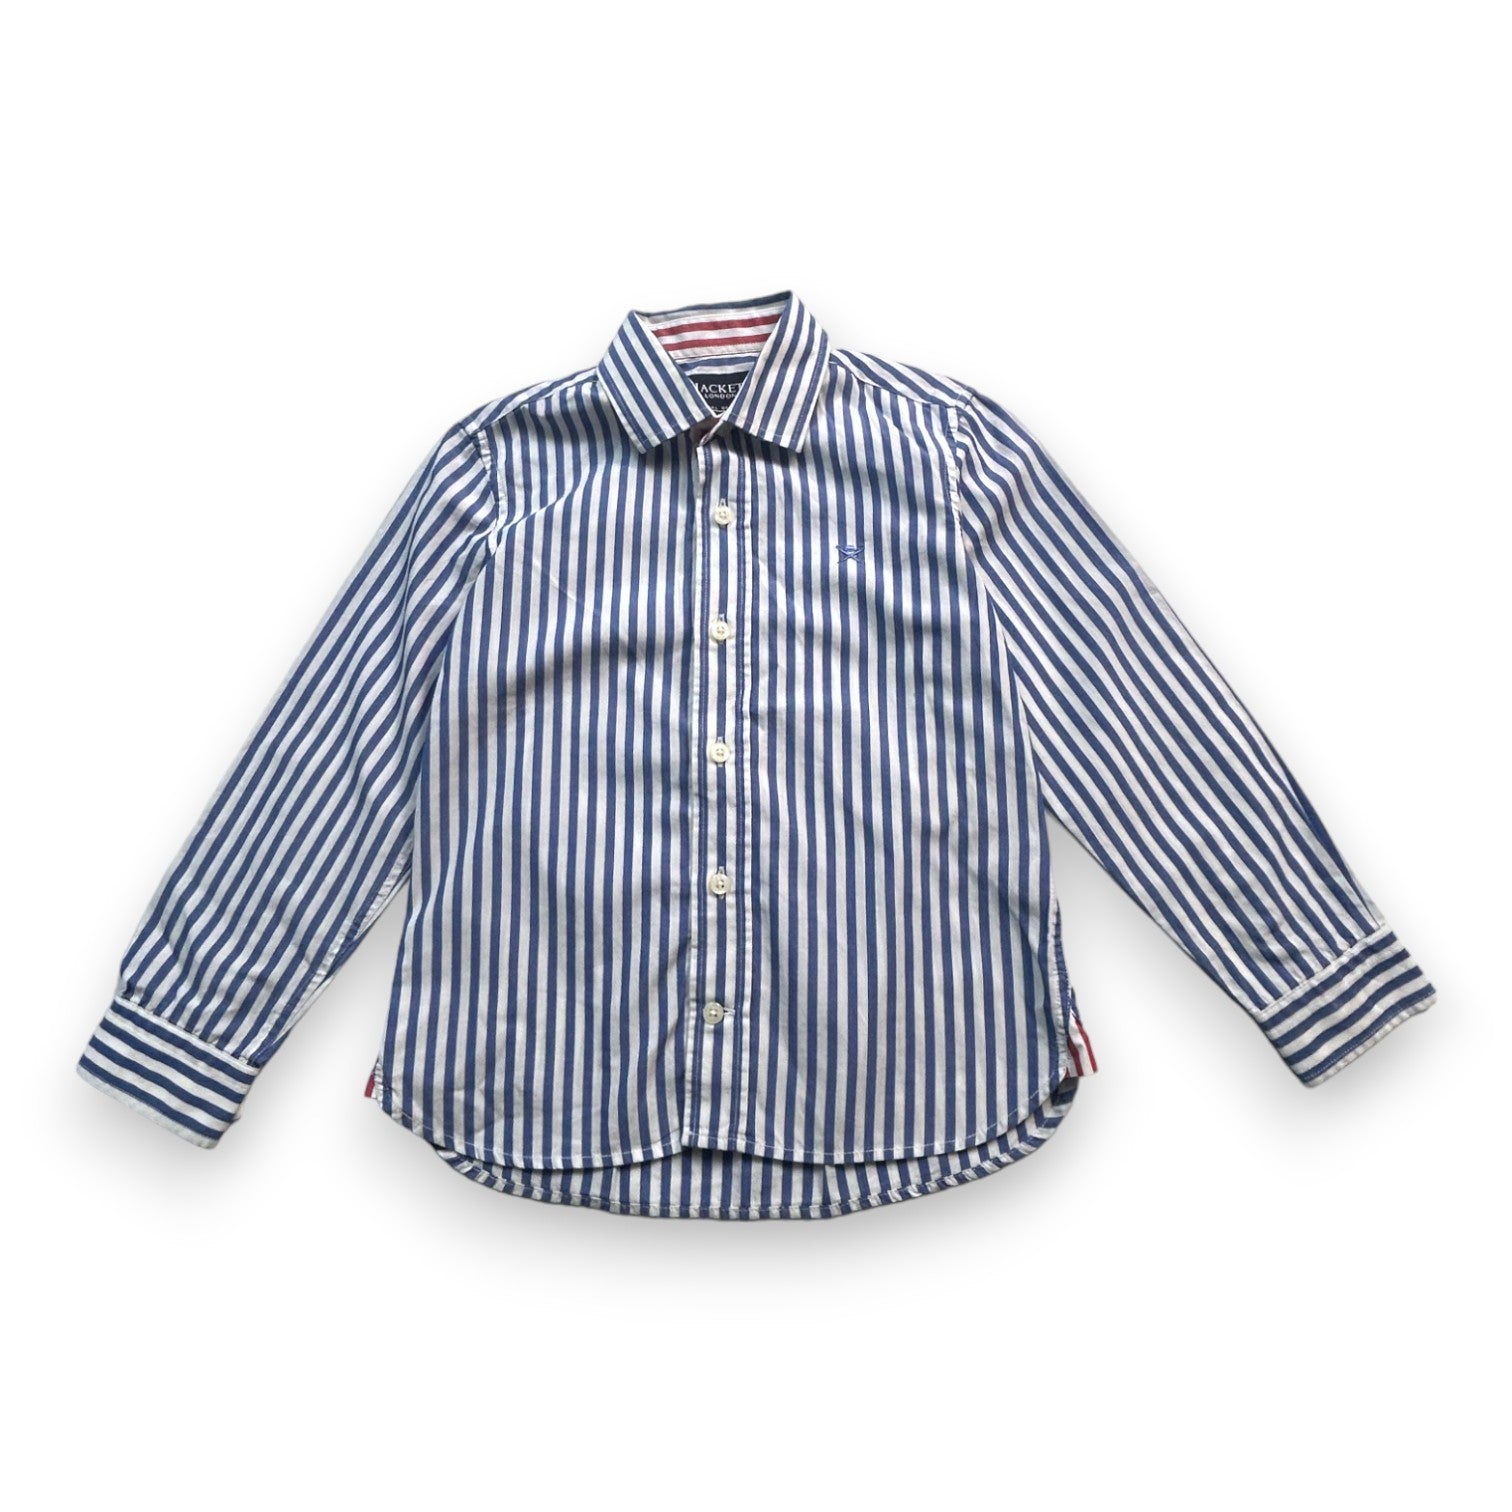 HACKETT - Chemise blanche à rayures bleues - 3/4 ans